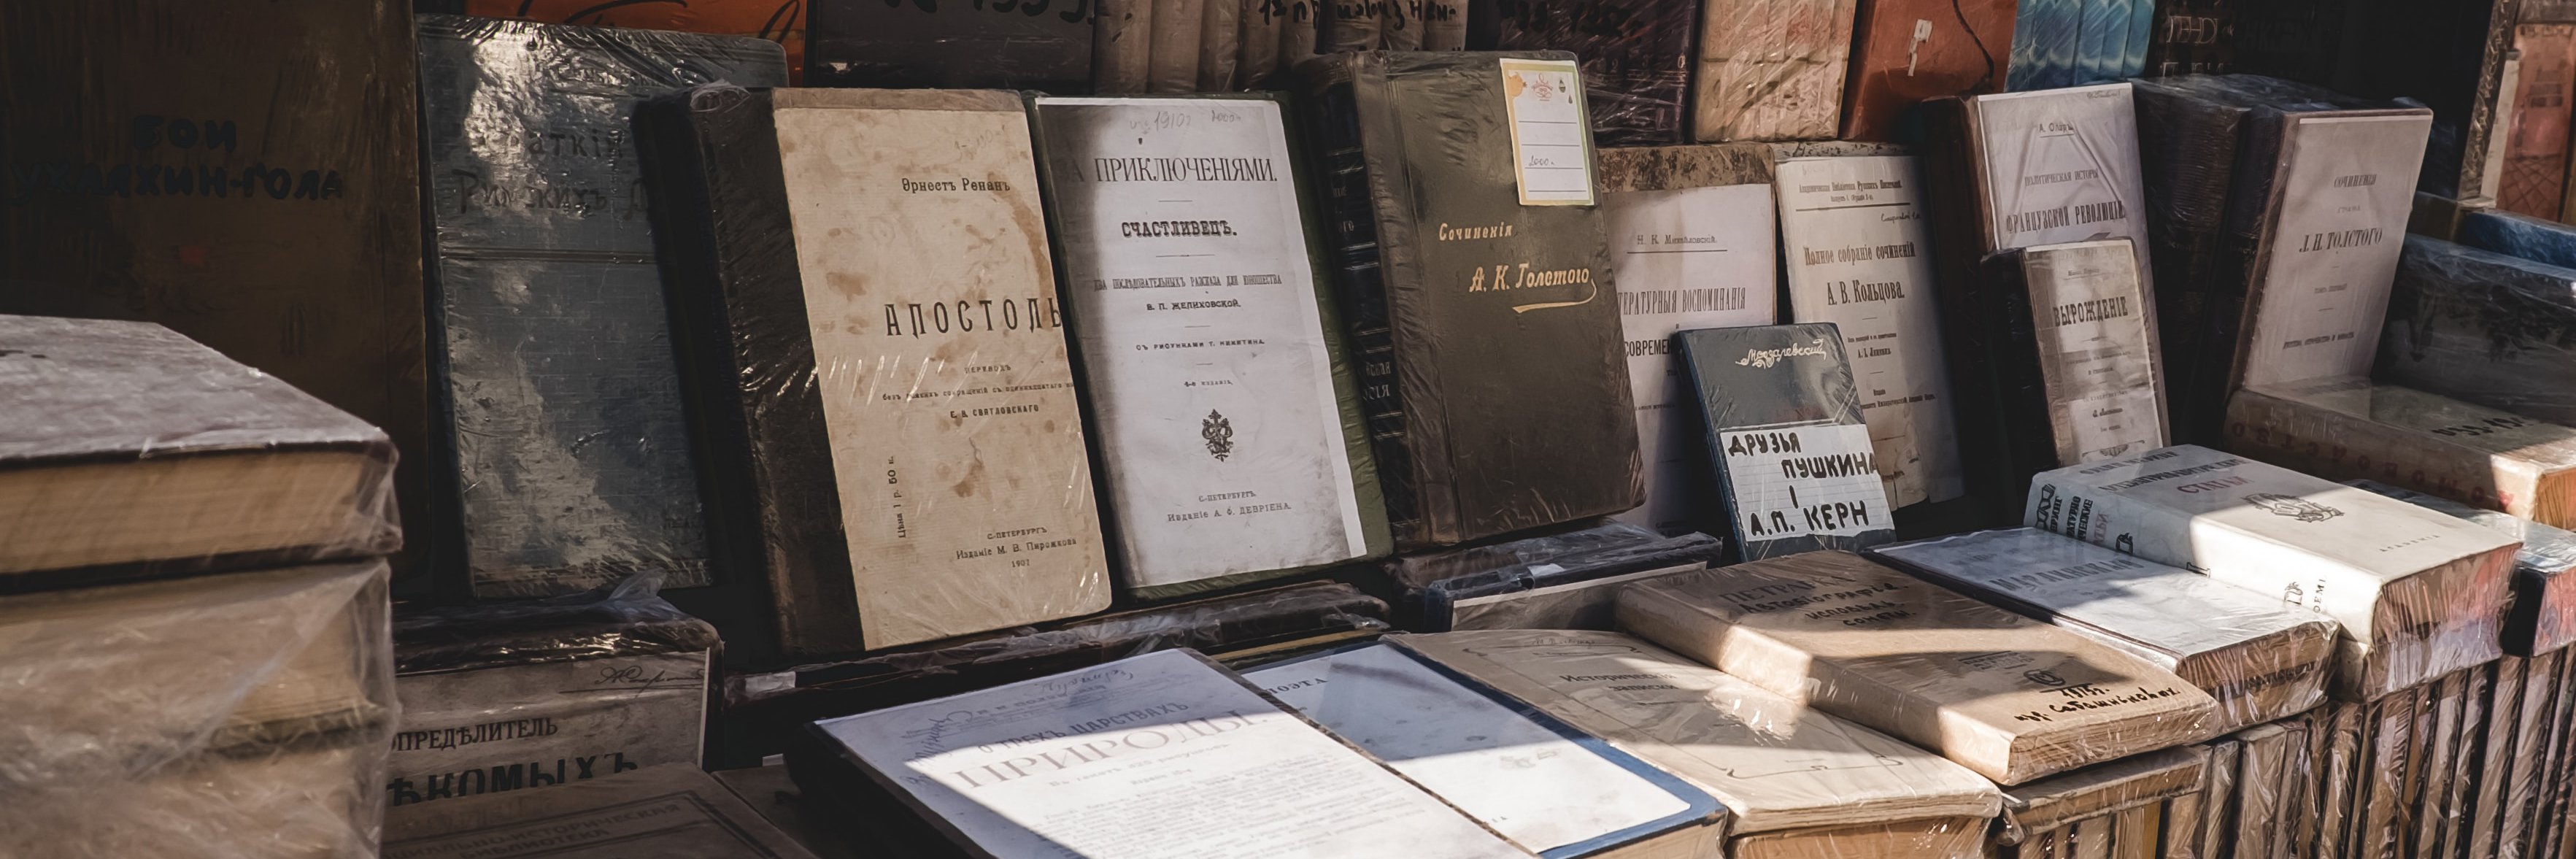 books in russian on display for sale